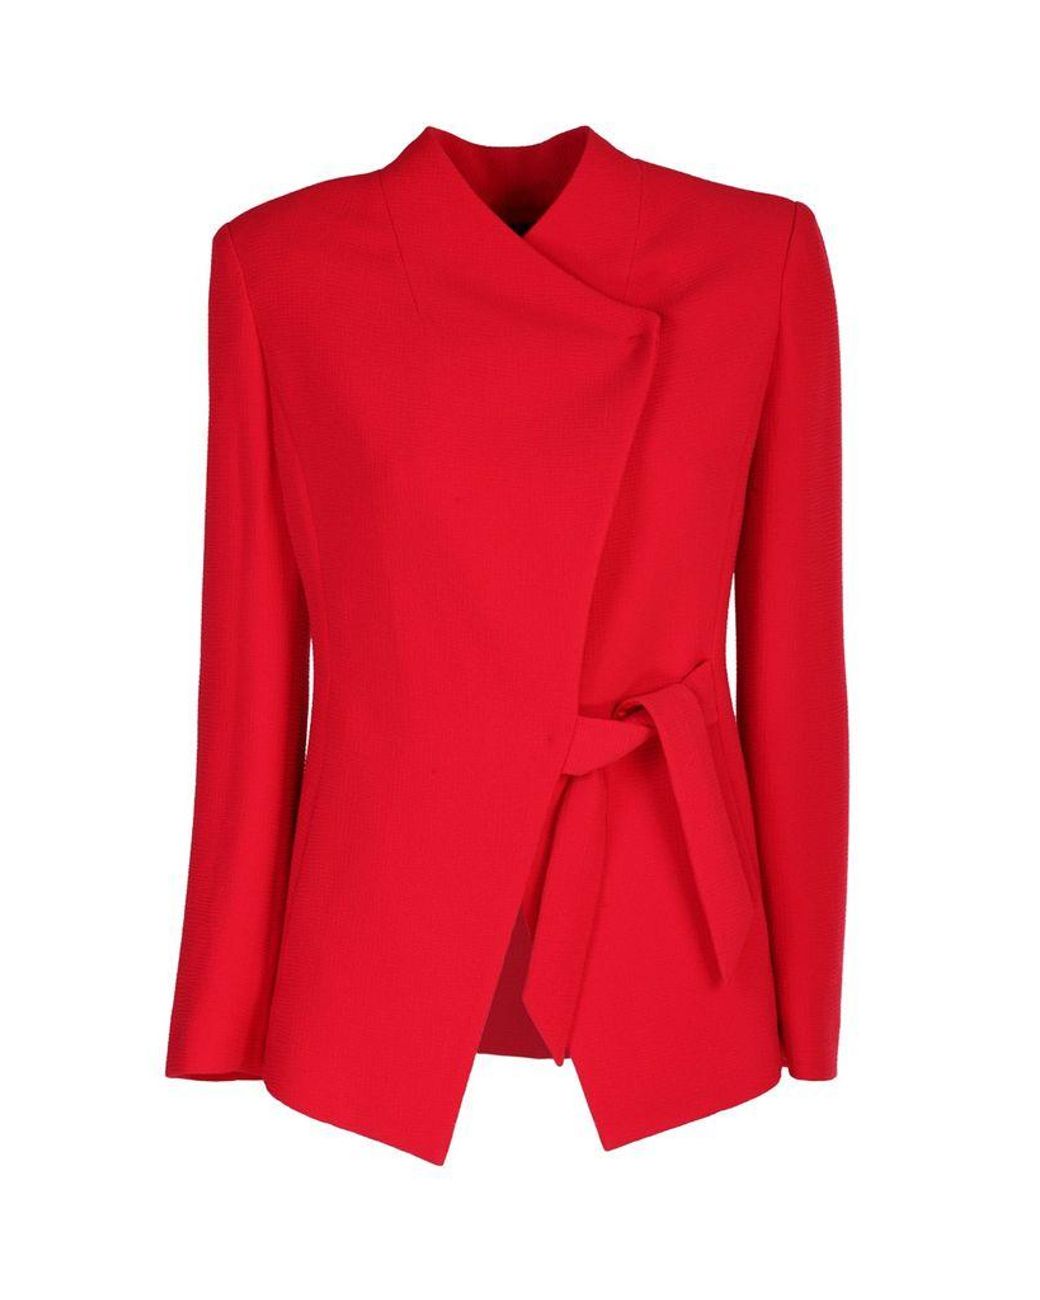 Emporio Armani Synthetic Jacket in Red - Lyst